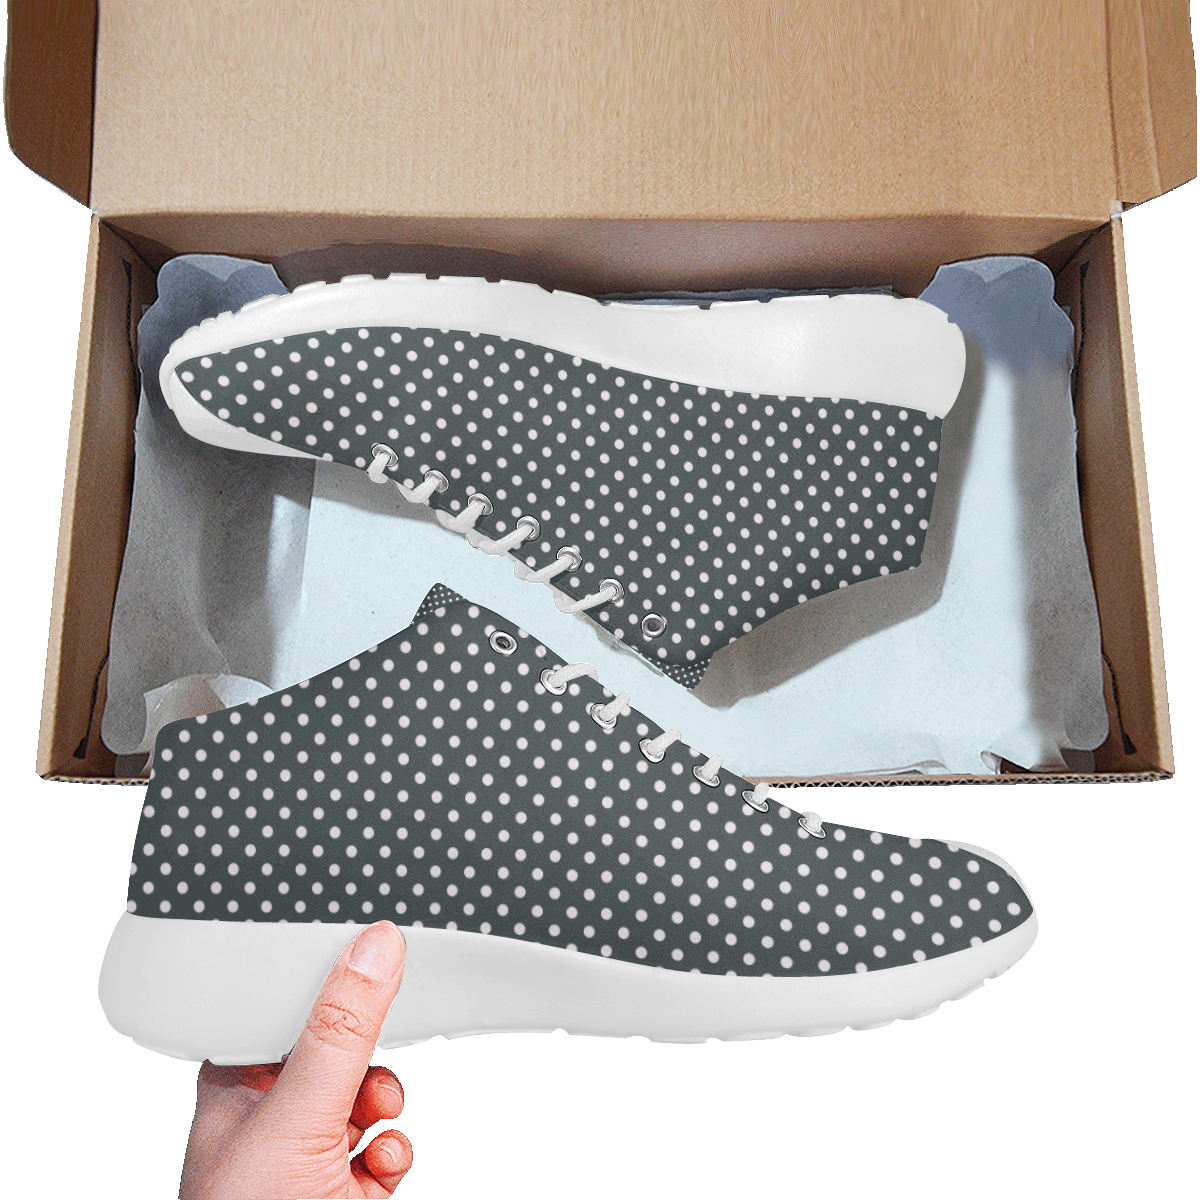 Silver polka dots Women's Basketball Training Shoes/Large Size (Model 47502)